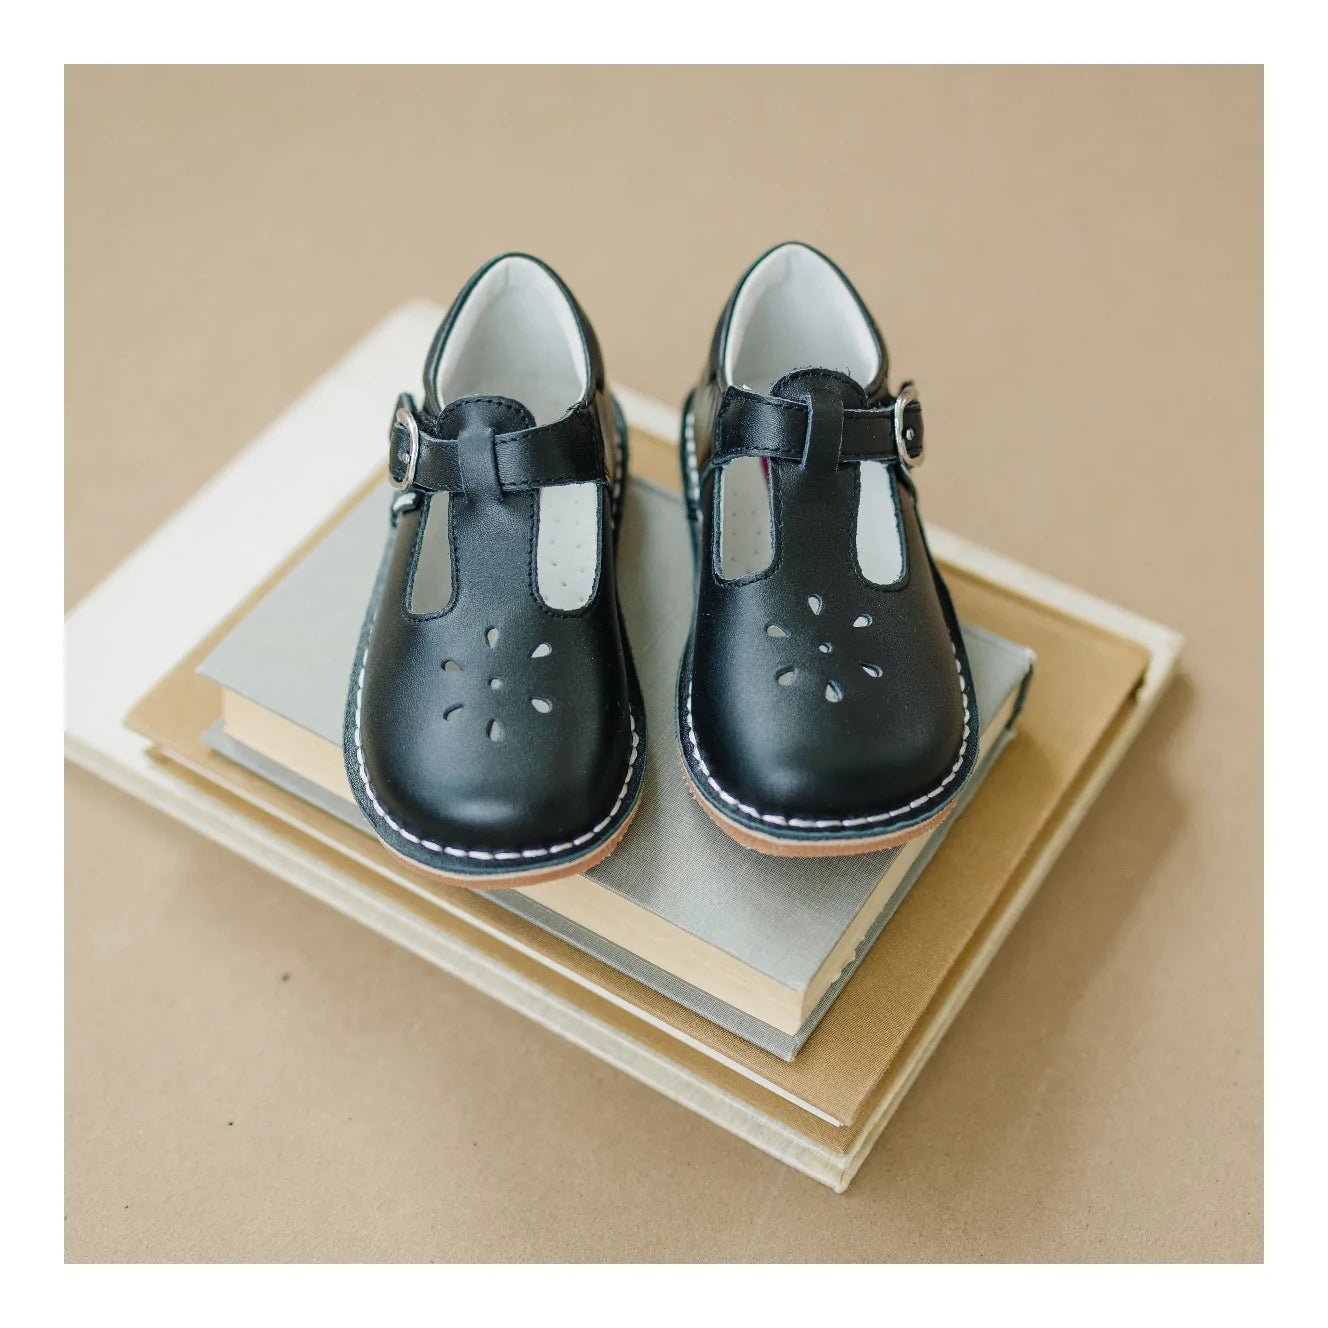 Joy Classic Leather T-Strap Mary Jane in Black  - Doodlebug's Children's Boutique